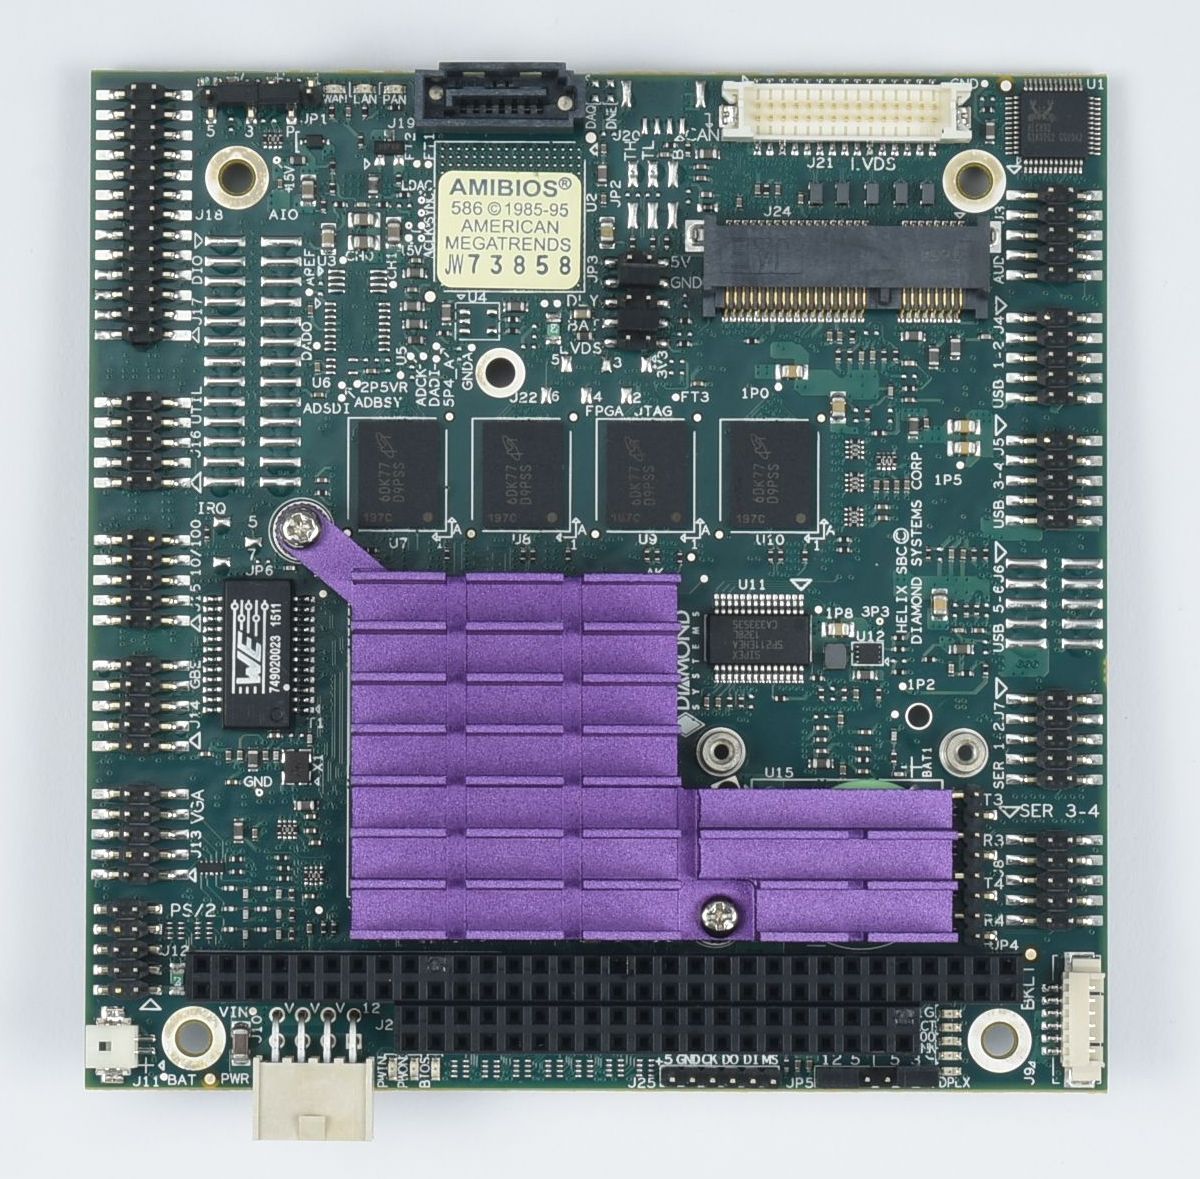 Helix PC/104 SBC: Processor Modules, Rugged, wide-temperature SBCs in PC/104, PC/104-<i>Plus</i>, EPIC, EBX, and other compact form-factors., PC/104